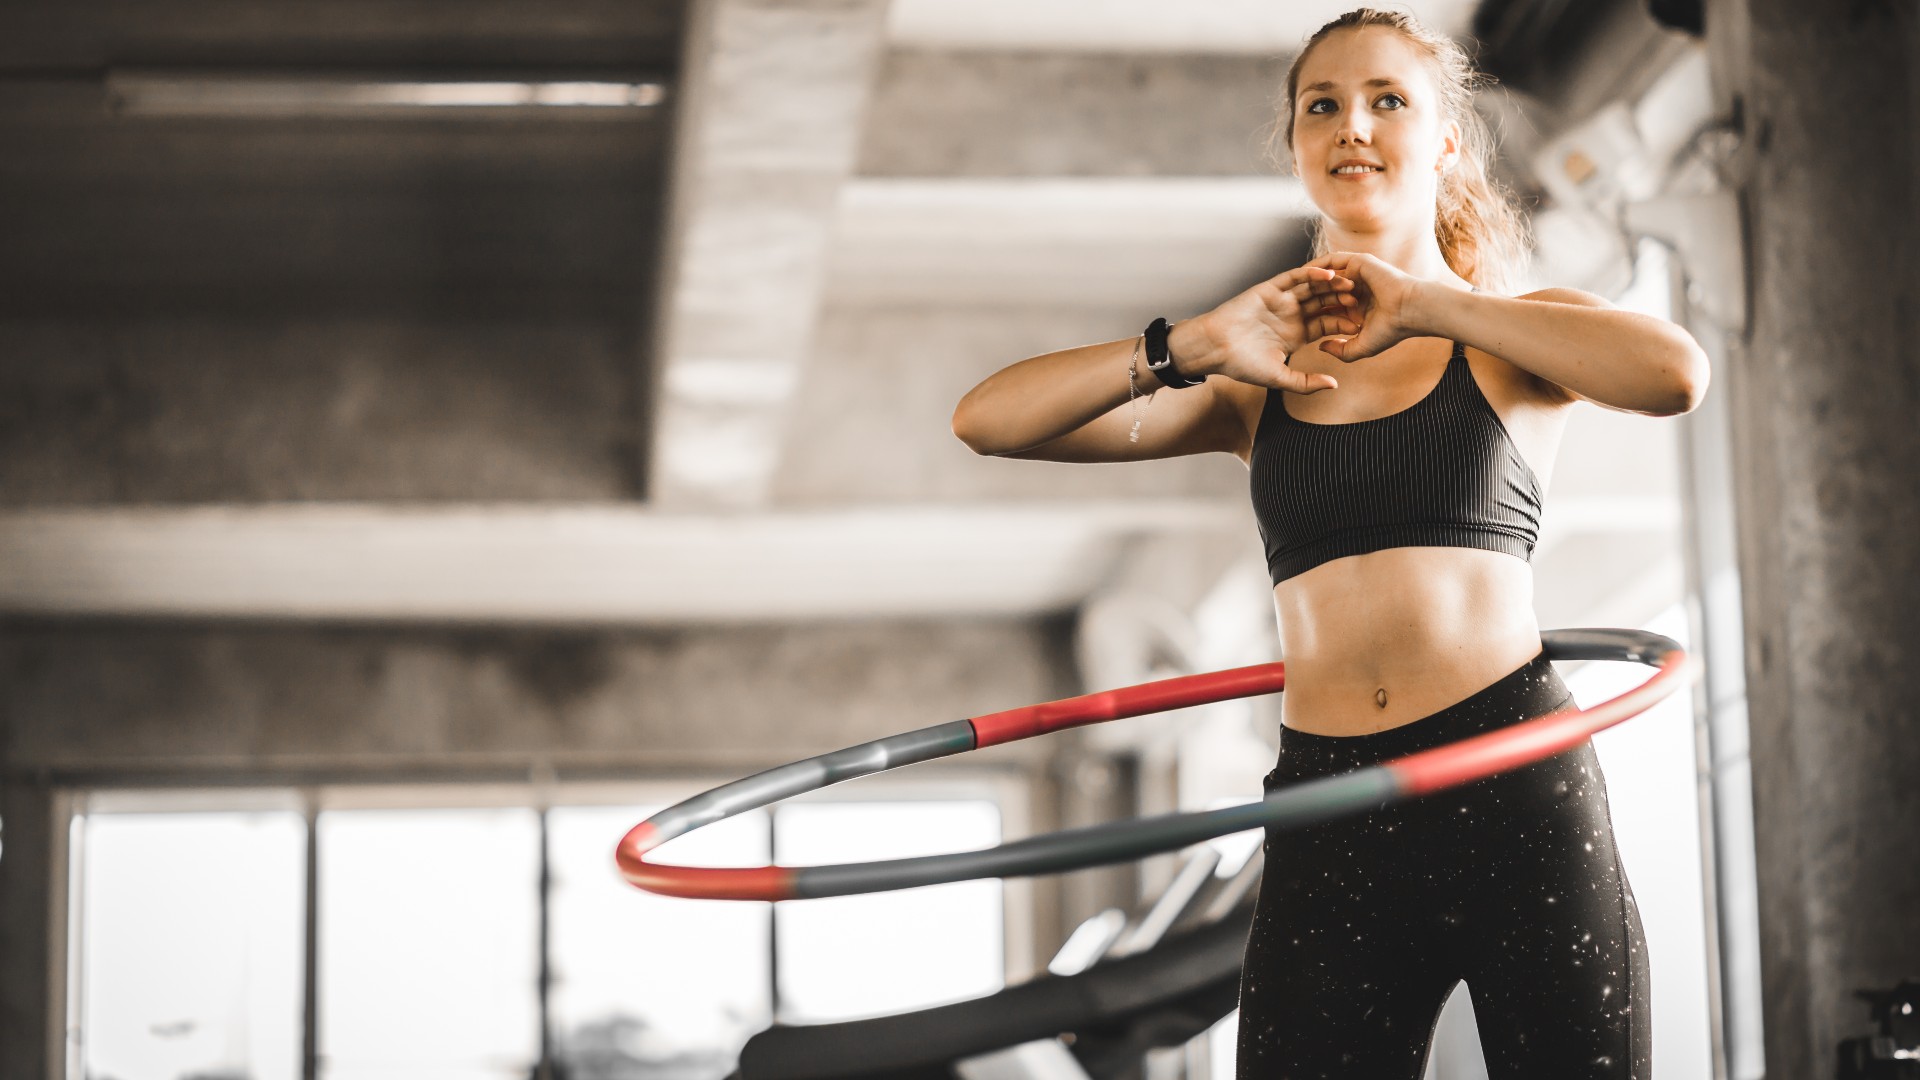 9 Hula Hoop Workouts from 3 to 30 minutes Long